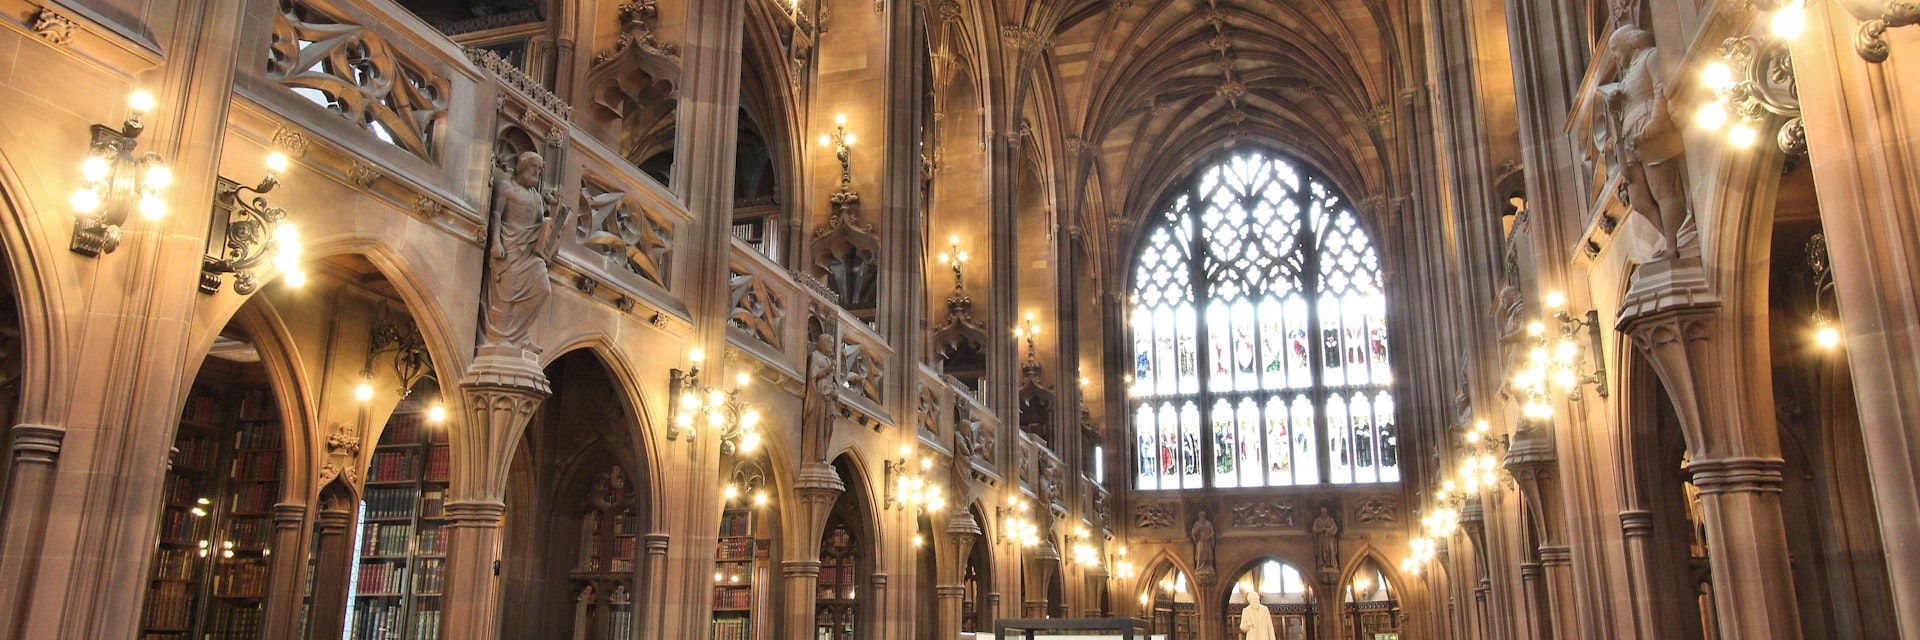 Manchester, United Kingdom - April 22, 2013: People visit John Rylands Library on April 22, 2013 in Manchester, UK. The library opened to public in 1900 and is a Grade I Listed building.